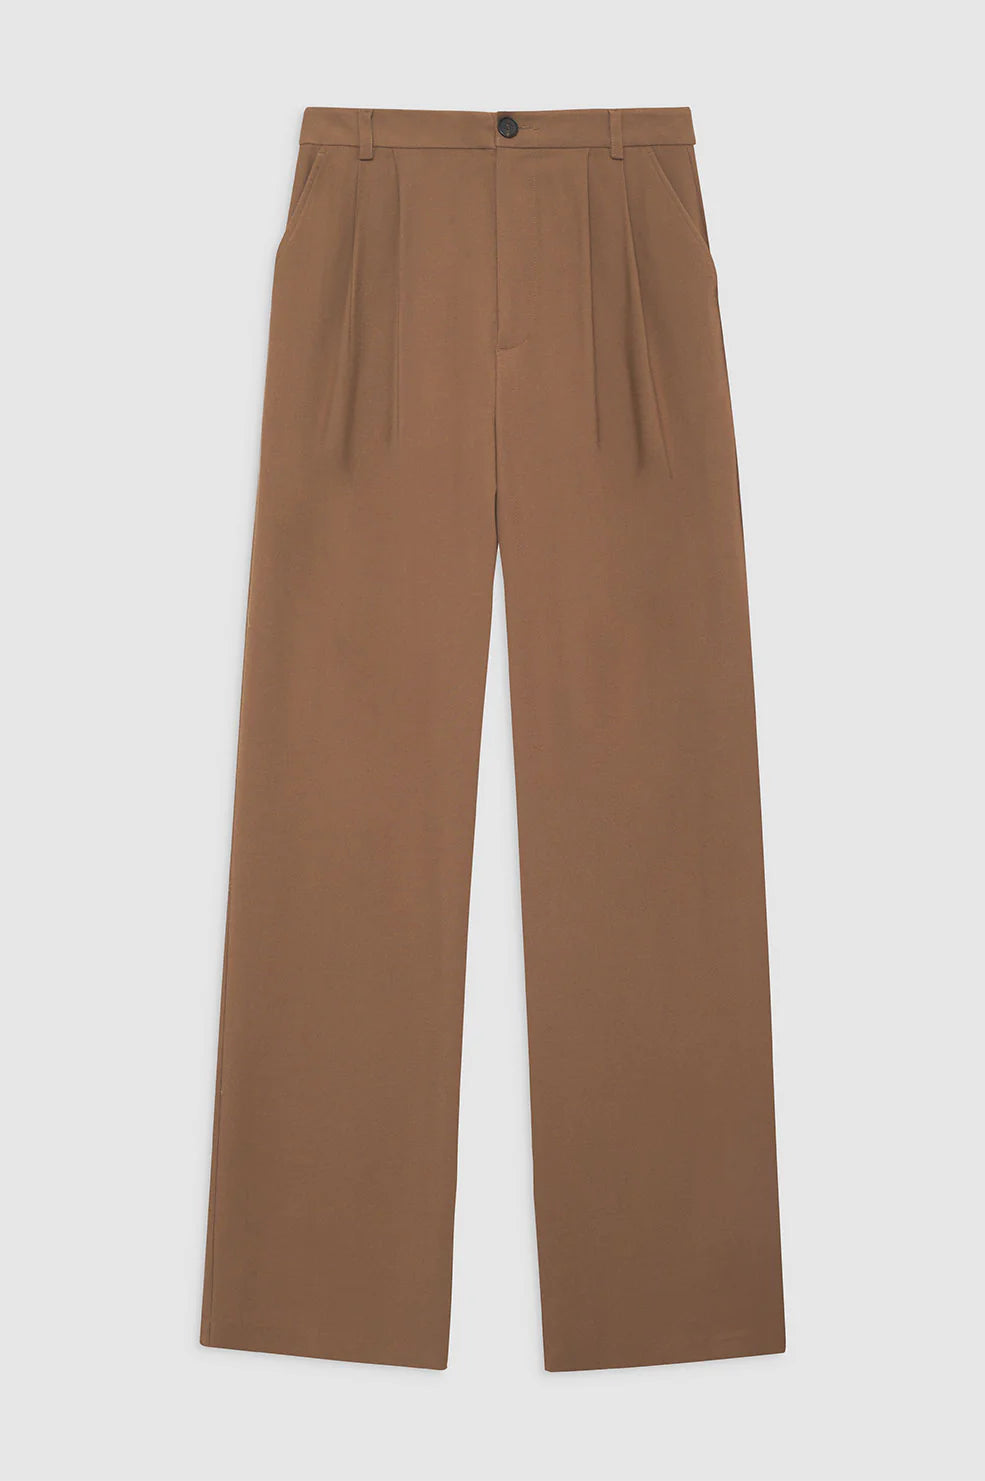 Anine Bing - Carrie Twill Pant - Camel